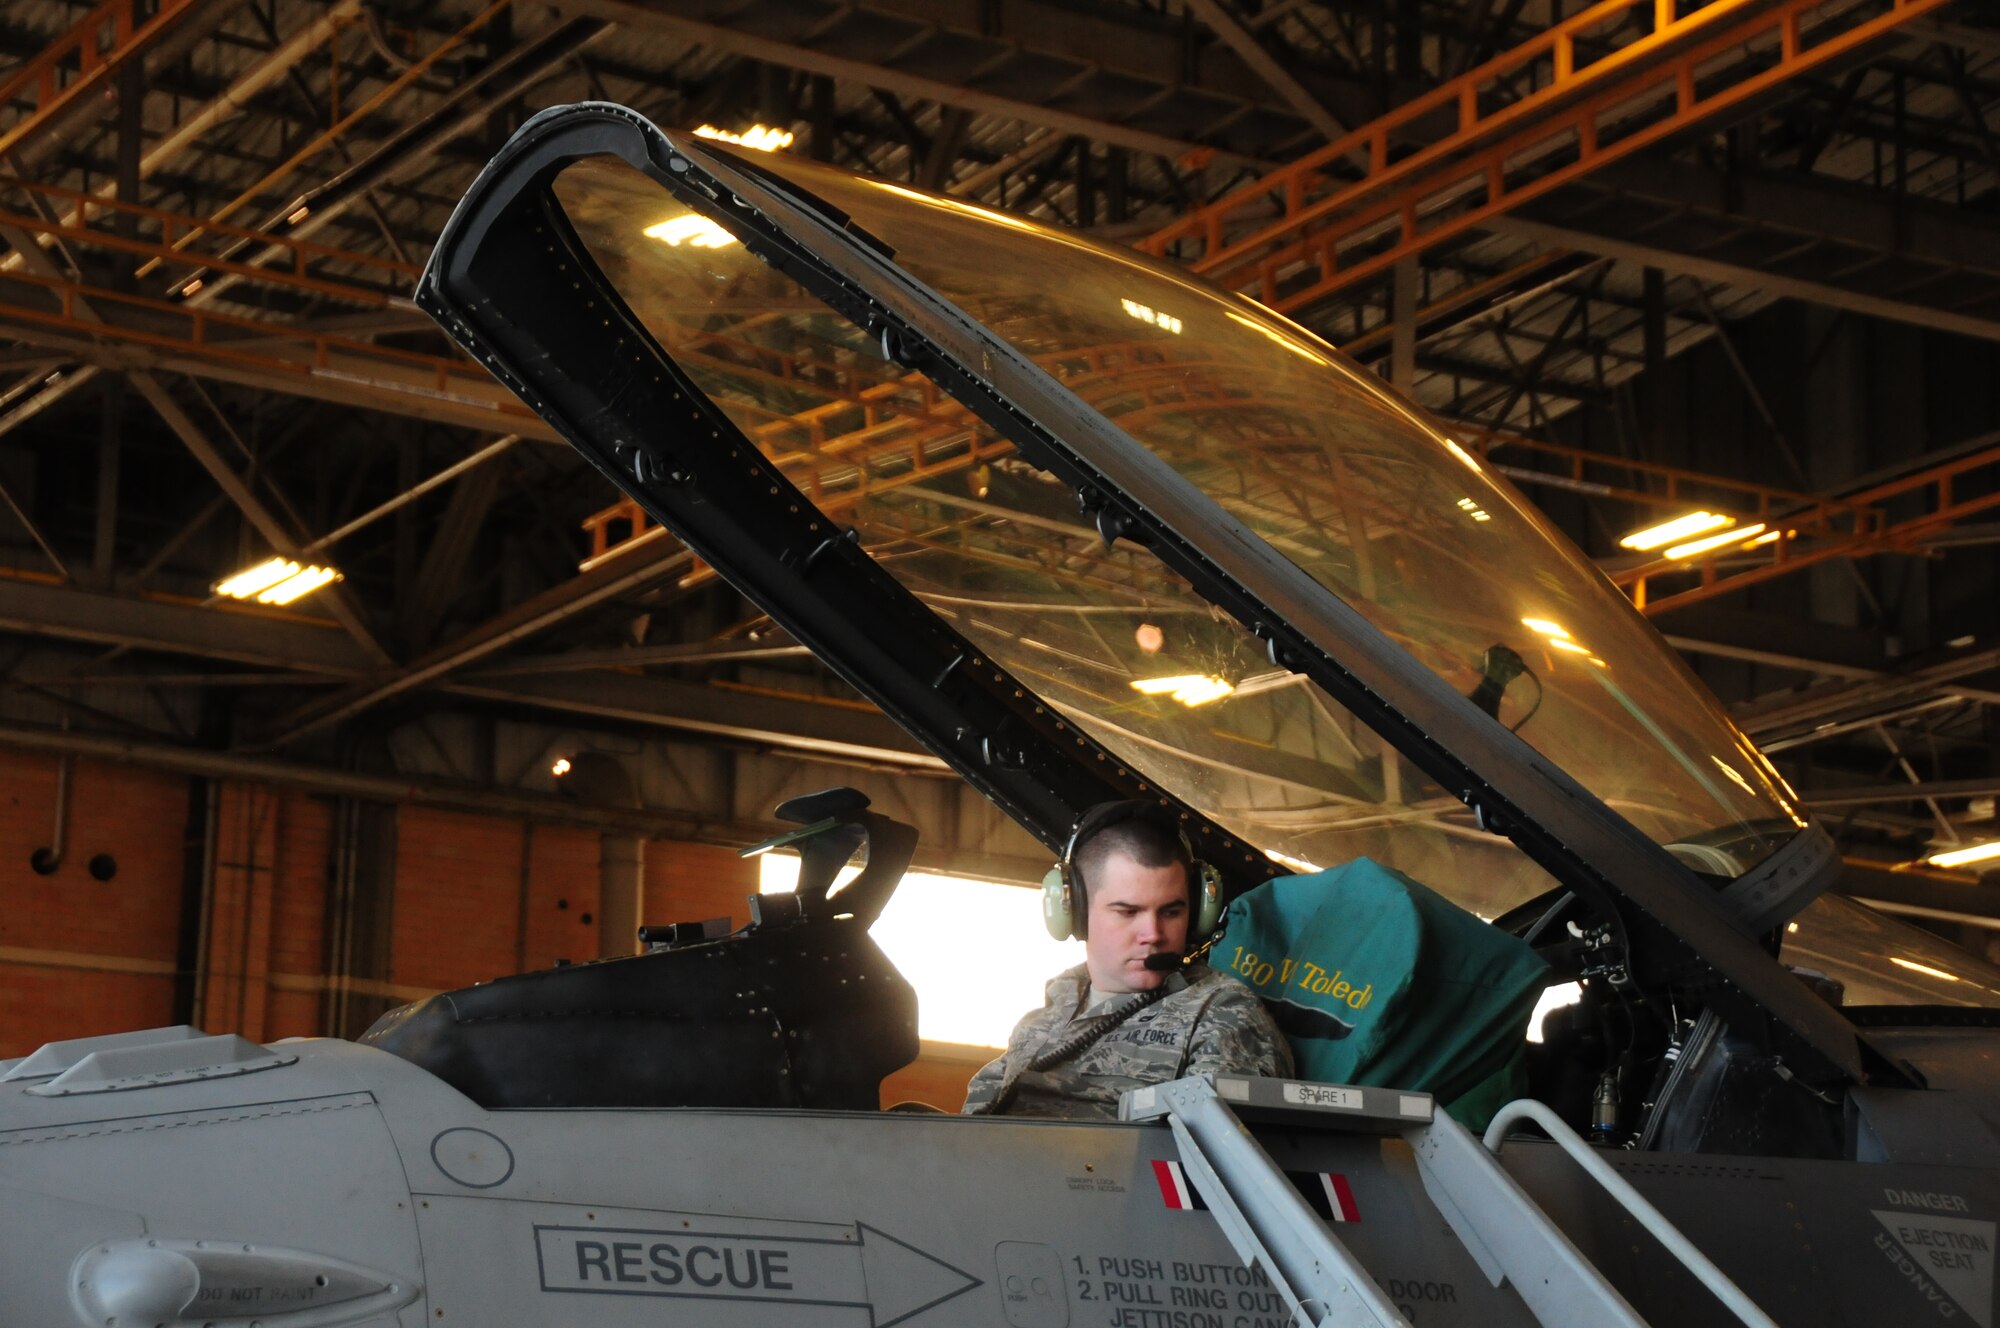 180th Fighter Wing Crew Chief, Senior Airman Andy Cocke controls the hydraulics while other Airmen repair the landing gear of an F-16 Fighting Falcon at Joint Reserve Base New Orleans, New Orleans, La.  Jan. 16, 2014.  The 180th Fighter Wing is currently participating in a training exercise with F-15 Screaming Eagles from the 159th FW, New Orleans Air National Guard.  The purpose of this training is to aid pilots in maintaining familiarity with capabilities of different fighter aircraft.  The 180th’s F-16s are a multi-role aircraft whereas the F-15s conduct mainly air-to-air missions. (Ohio Air National Guard photo by Staff Sgt. Amber Williams/Released)